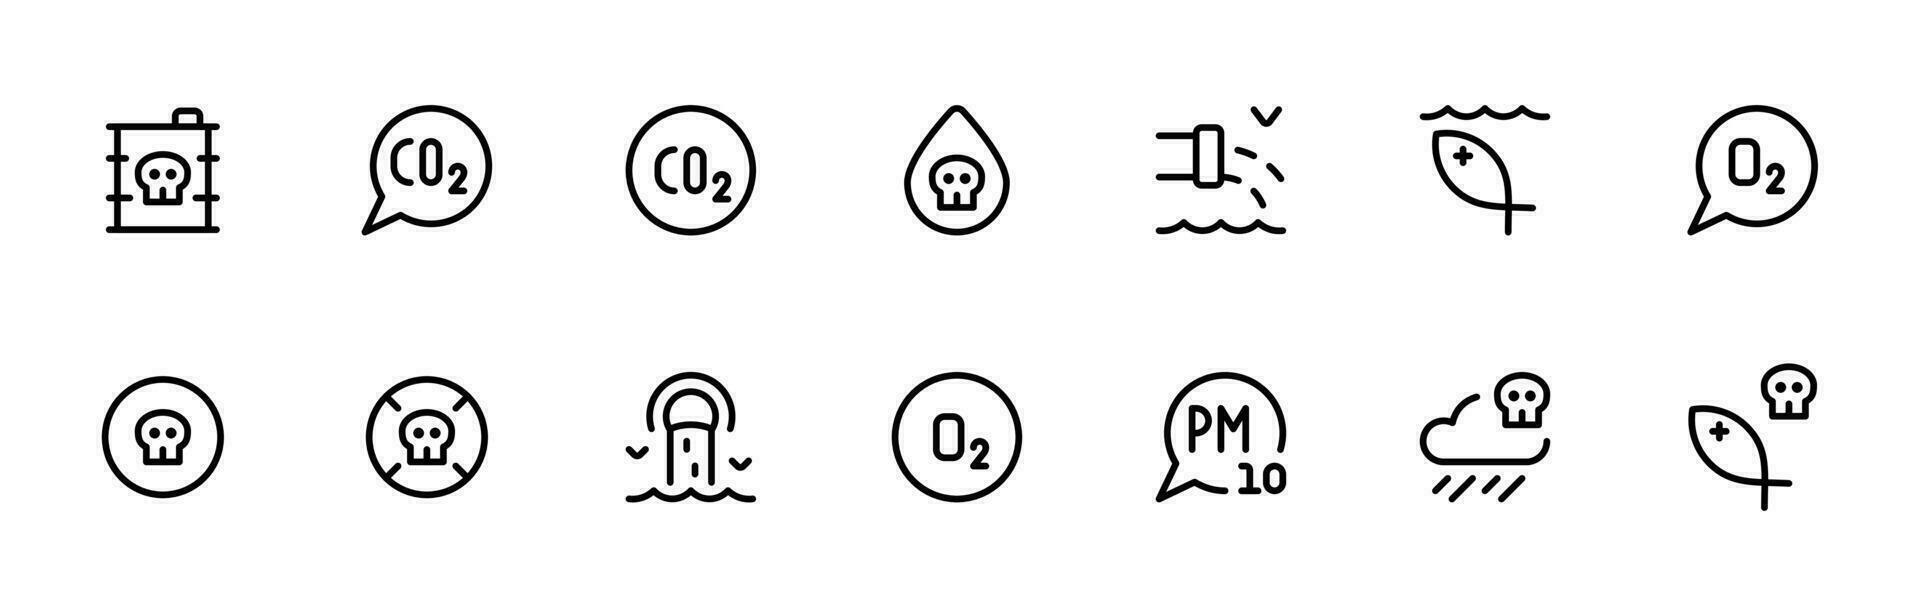 pollution related icons, such as, smoke, dust, gas, industry waste icon. flat vector and illustration, graphic, editable stroke. Suitable for website design, logo, app, template, and ui ux.